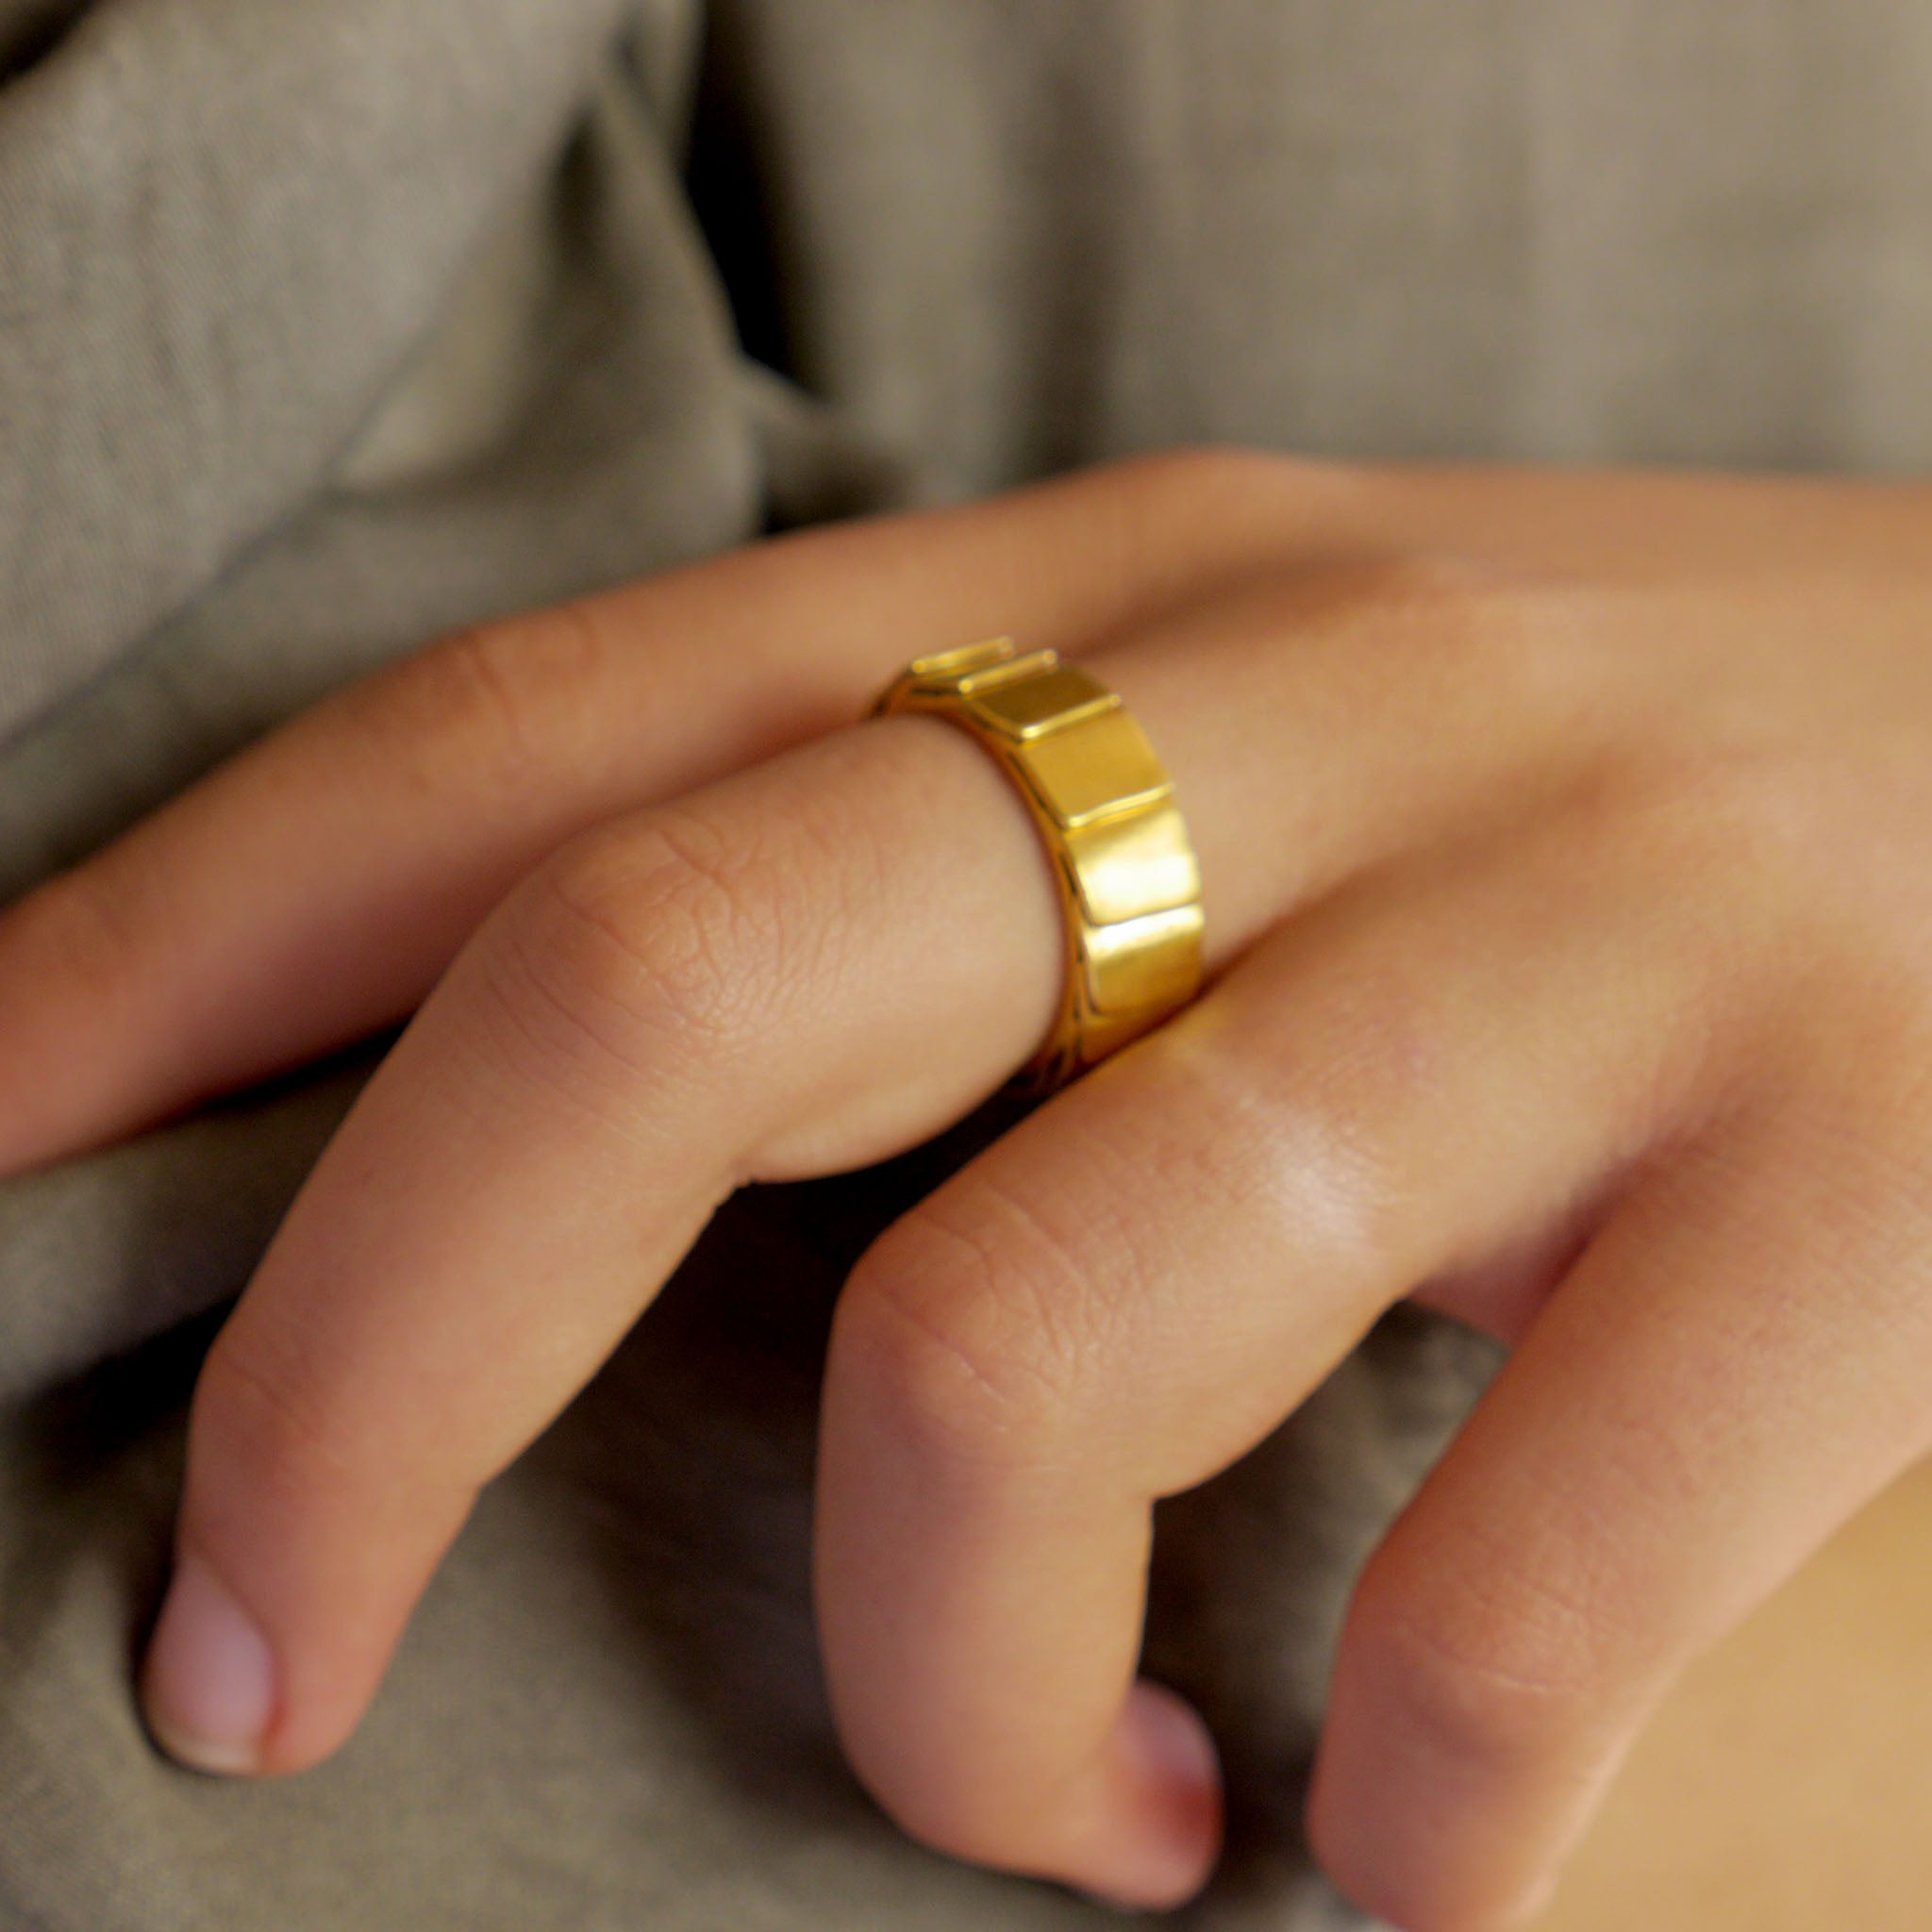 18k Gold ring on a model with overlapping layers, evoking a sense of perpetual motion and embrace. Smooth inner surface ensures maximum comfort.